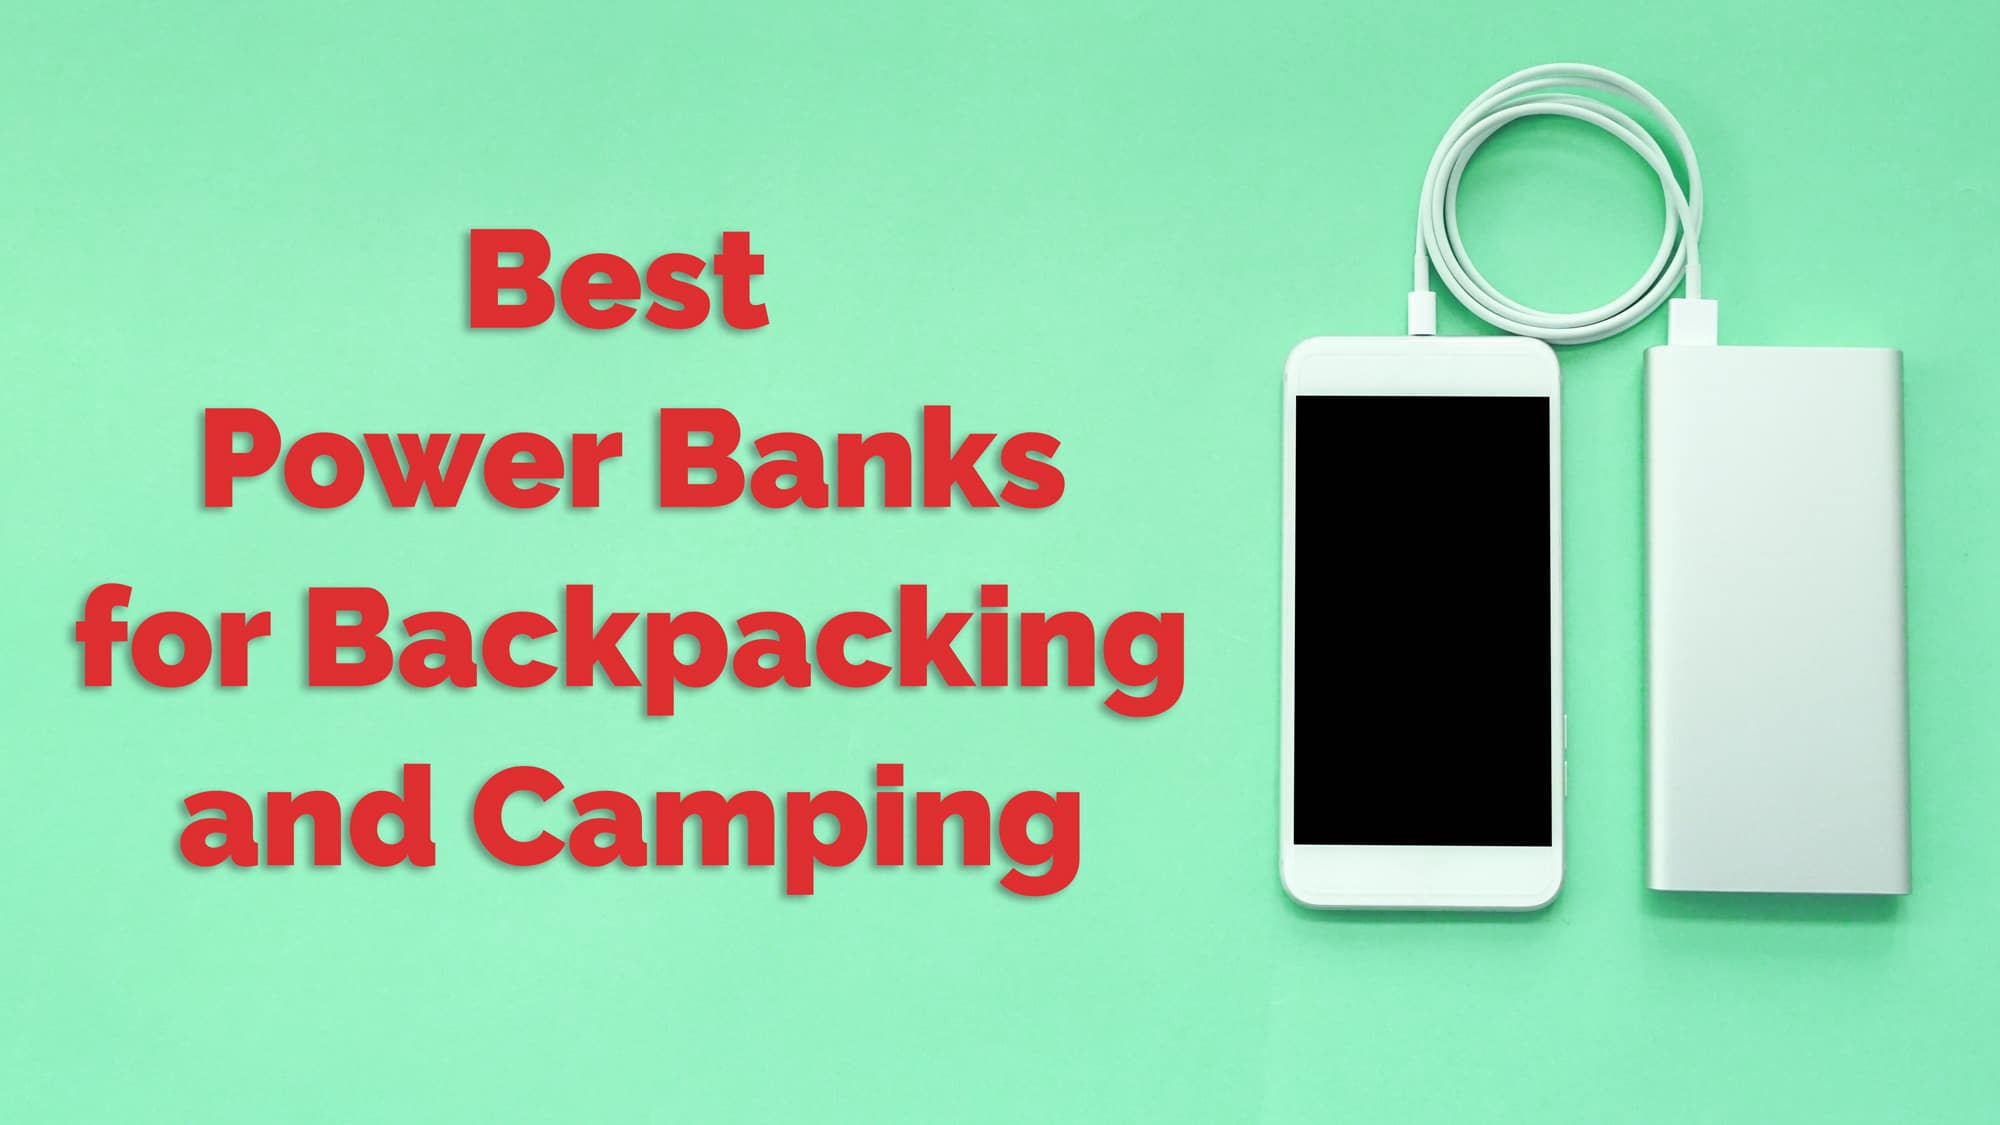 8 Best Power Banks for Backpacking and Camping